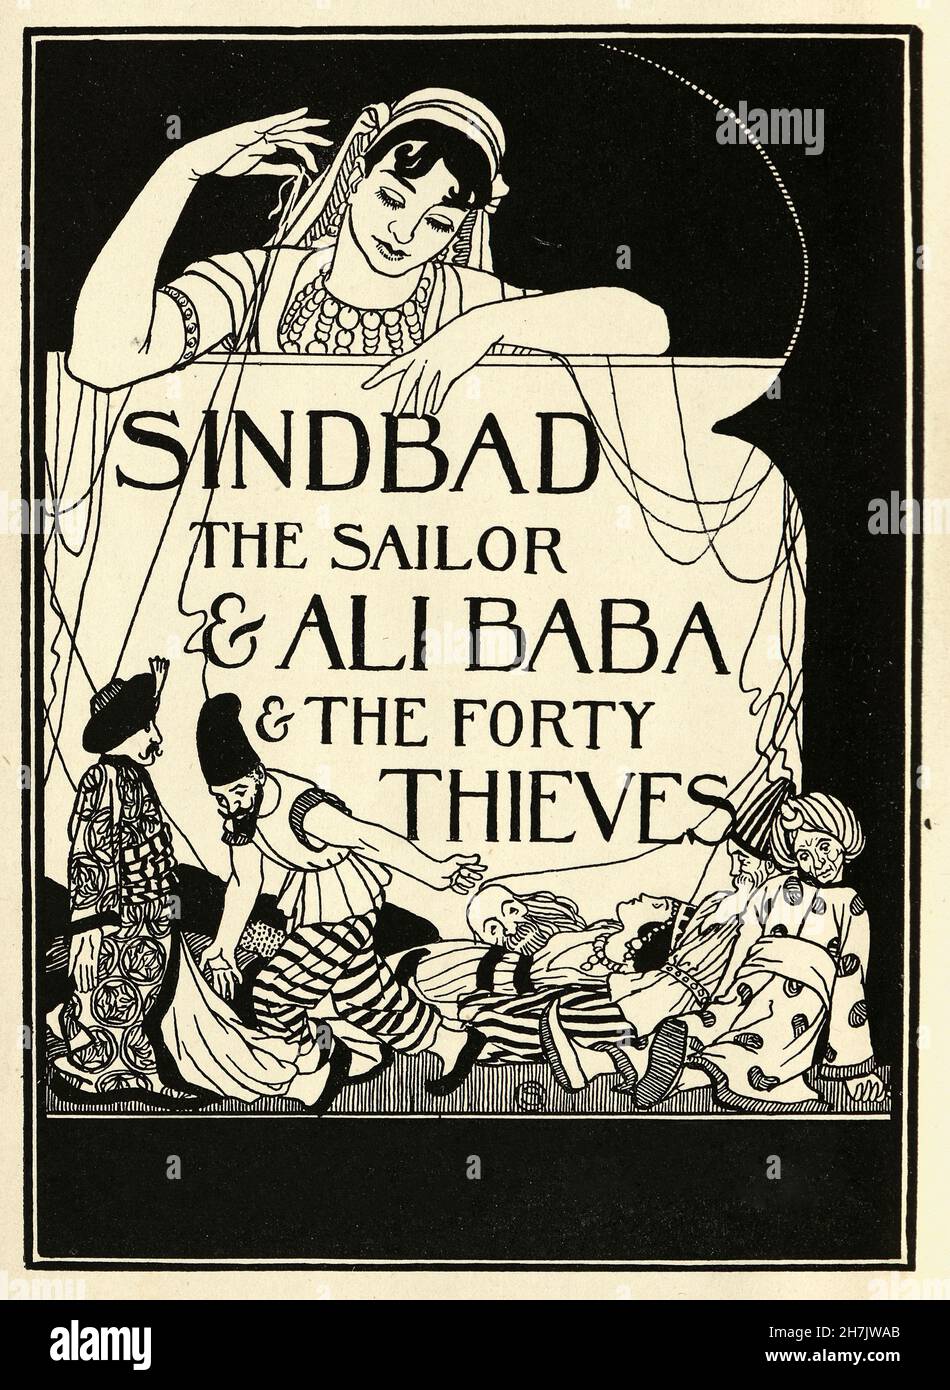 Vintage illustration from Sinbad the Sailor and Ali Baba and the Forty Thieves. Scheherazade as the puppet master. William Strang Stock Photo